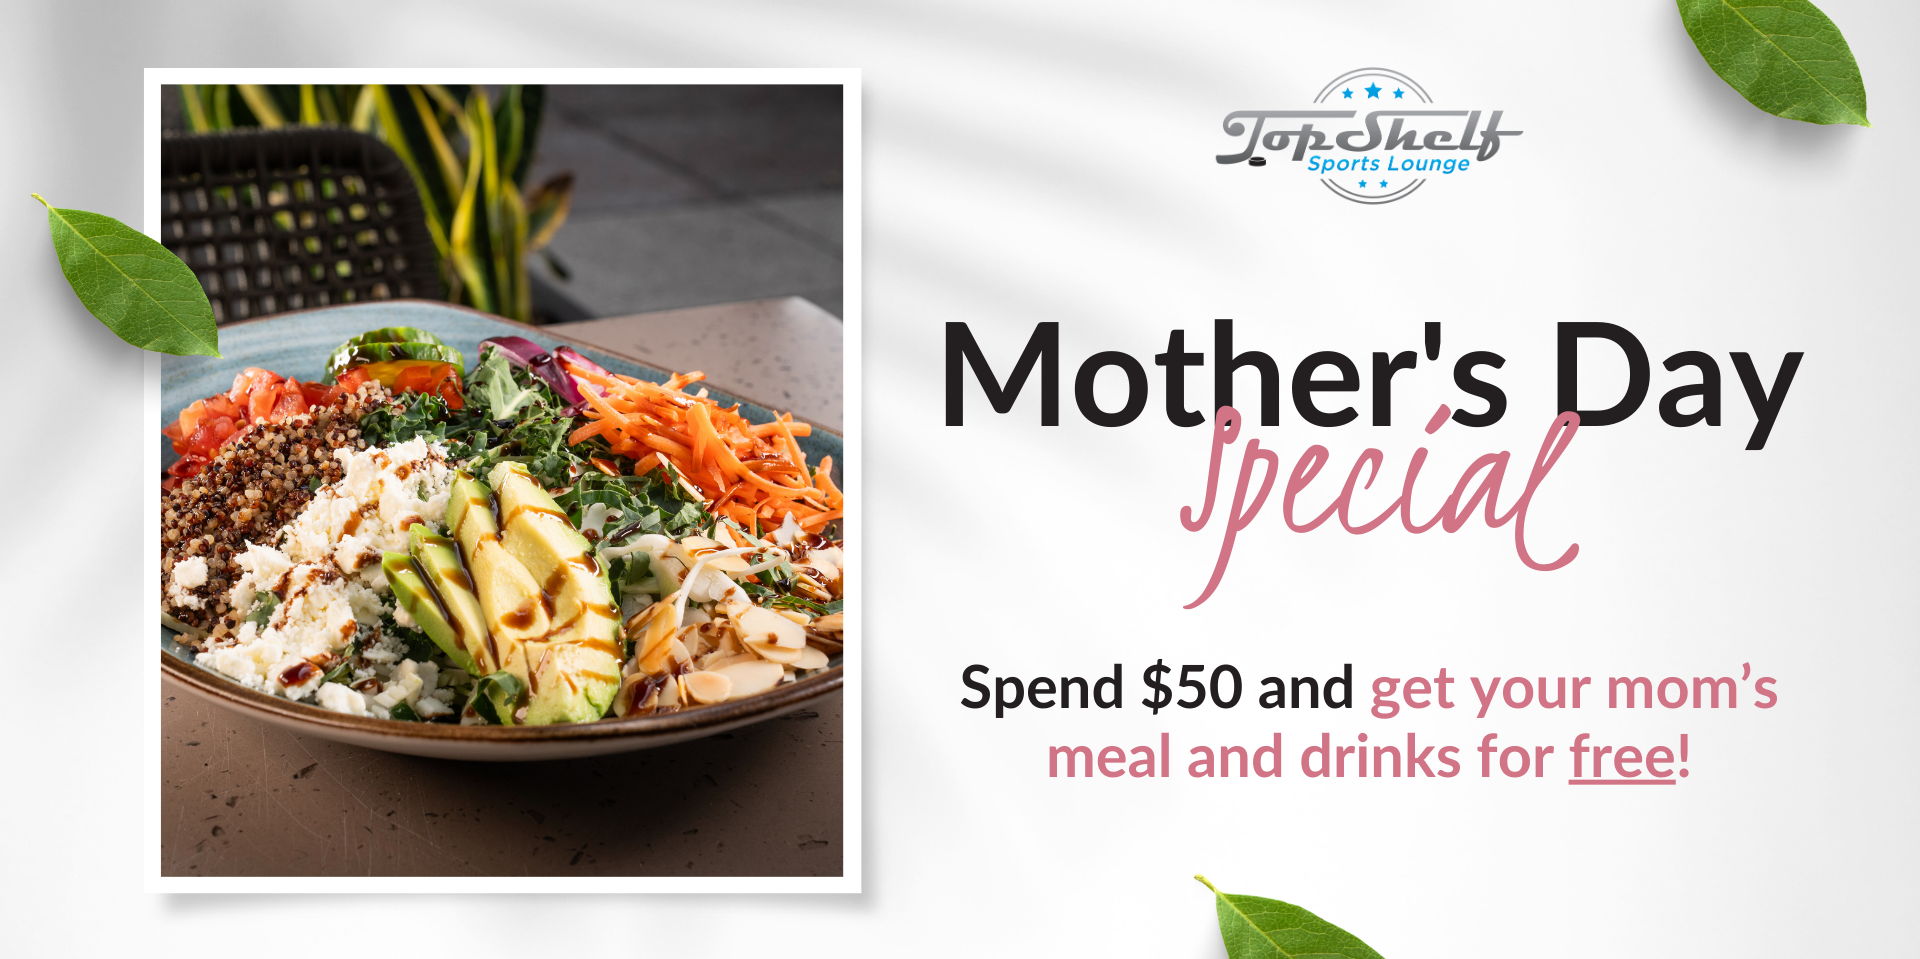 Mother's Day Special - Downtown Tampa promotional image